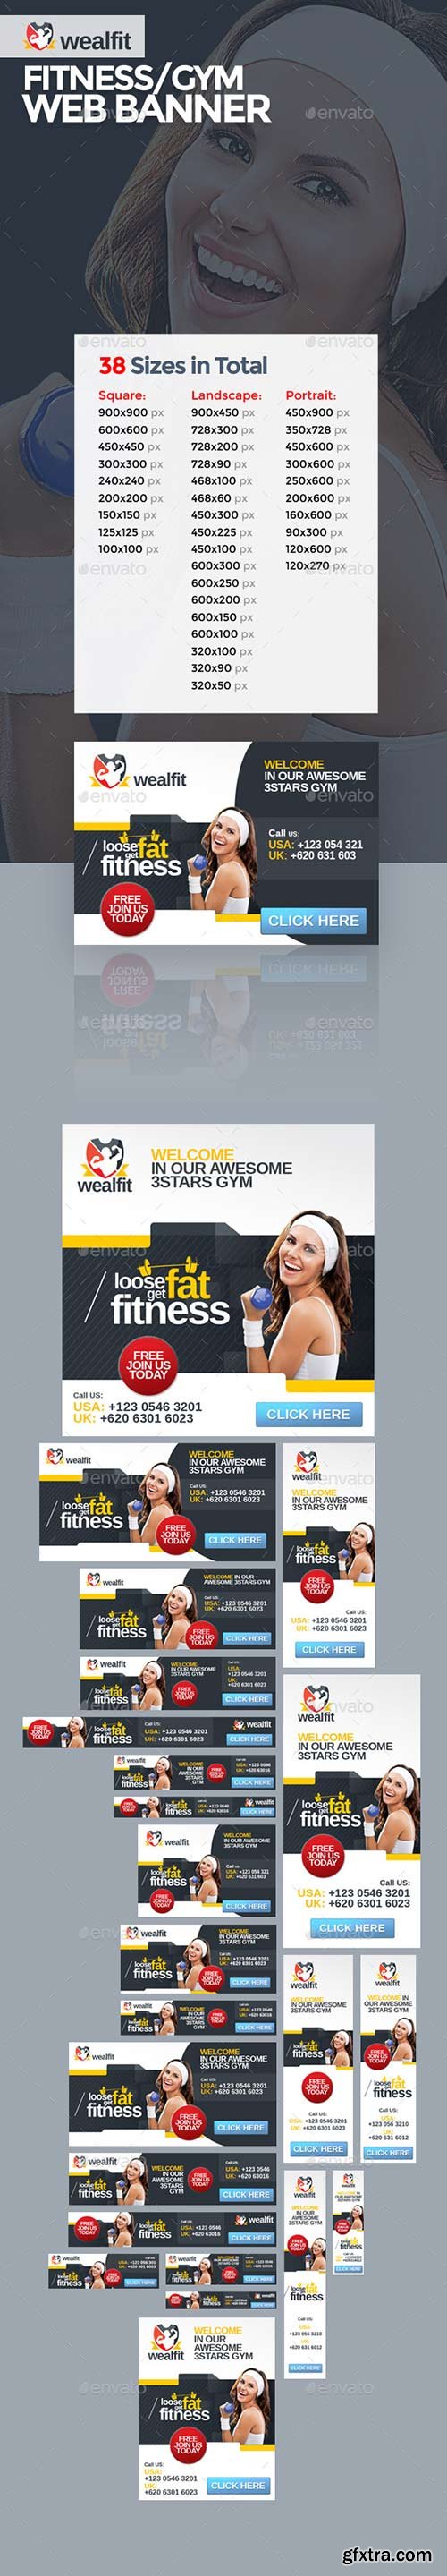 Graphicriver - WealFit | Fitness - Gym Web Banner 10092326